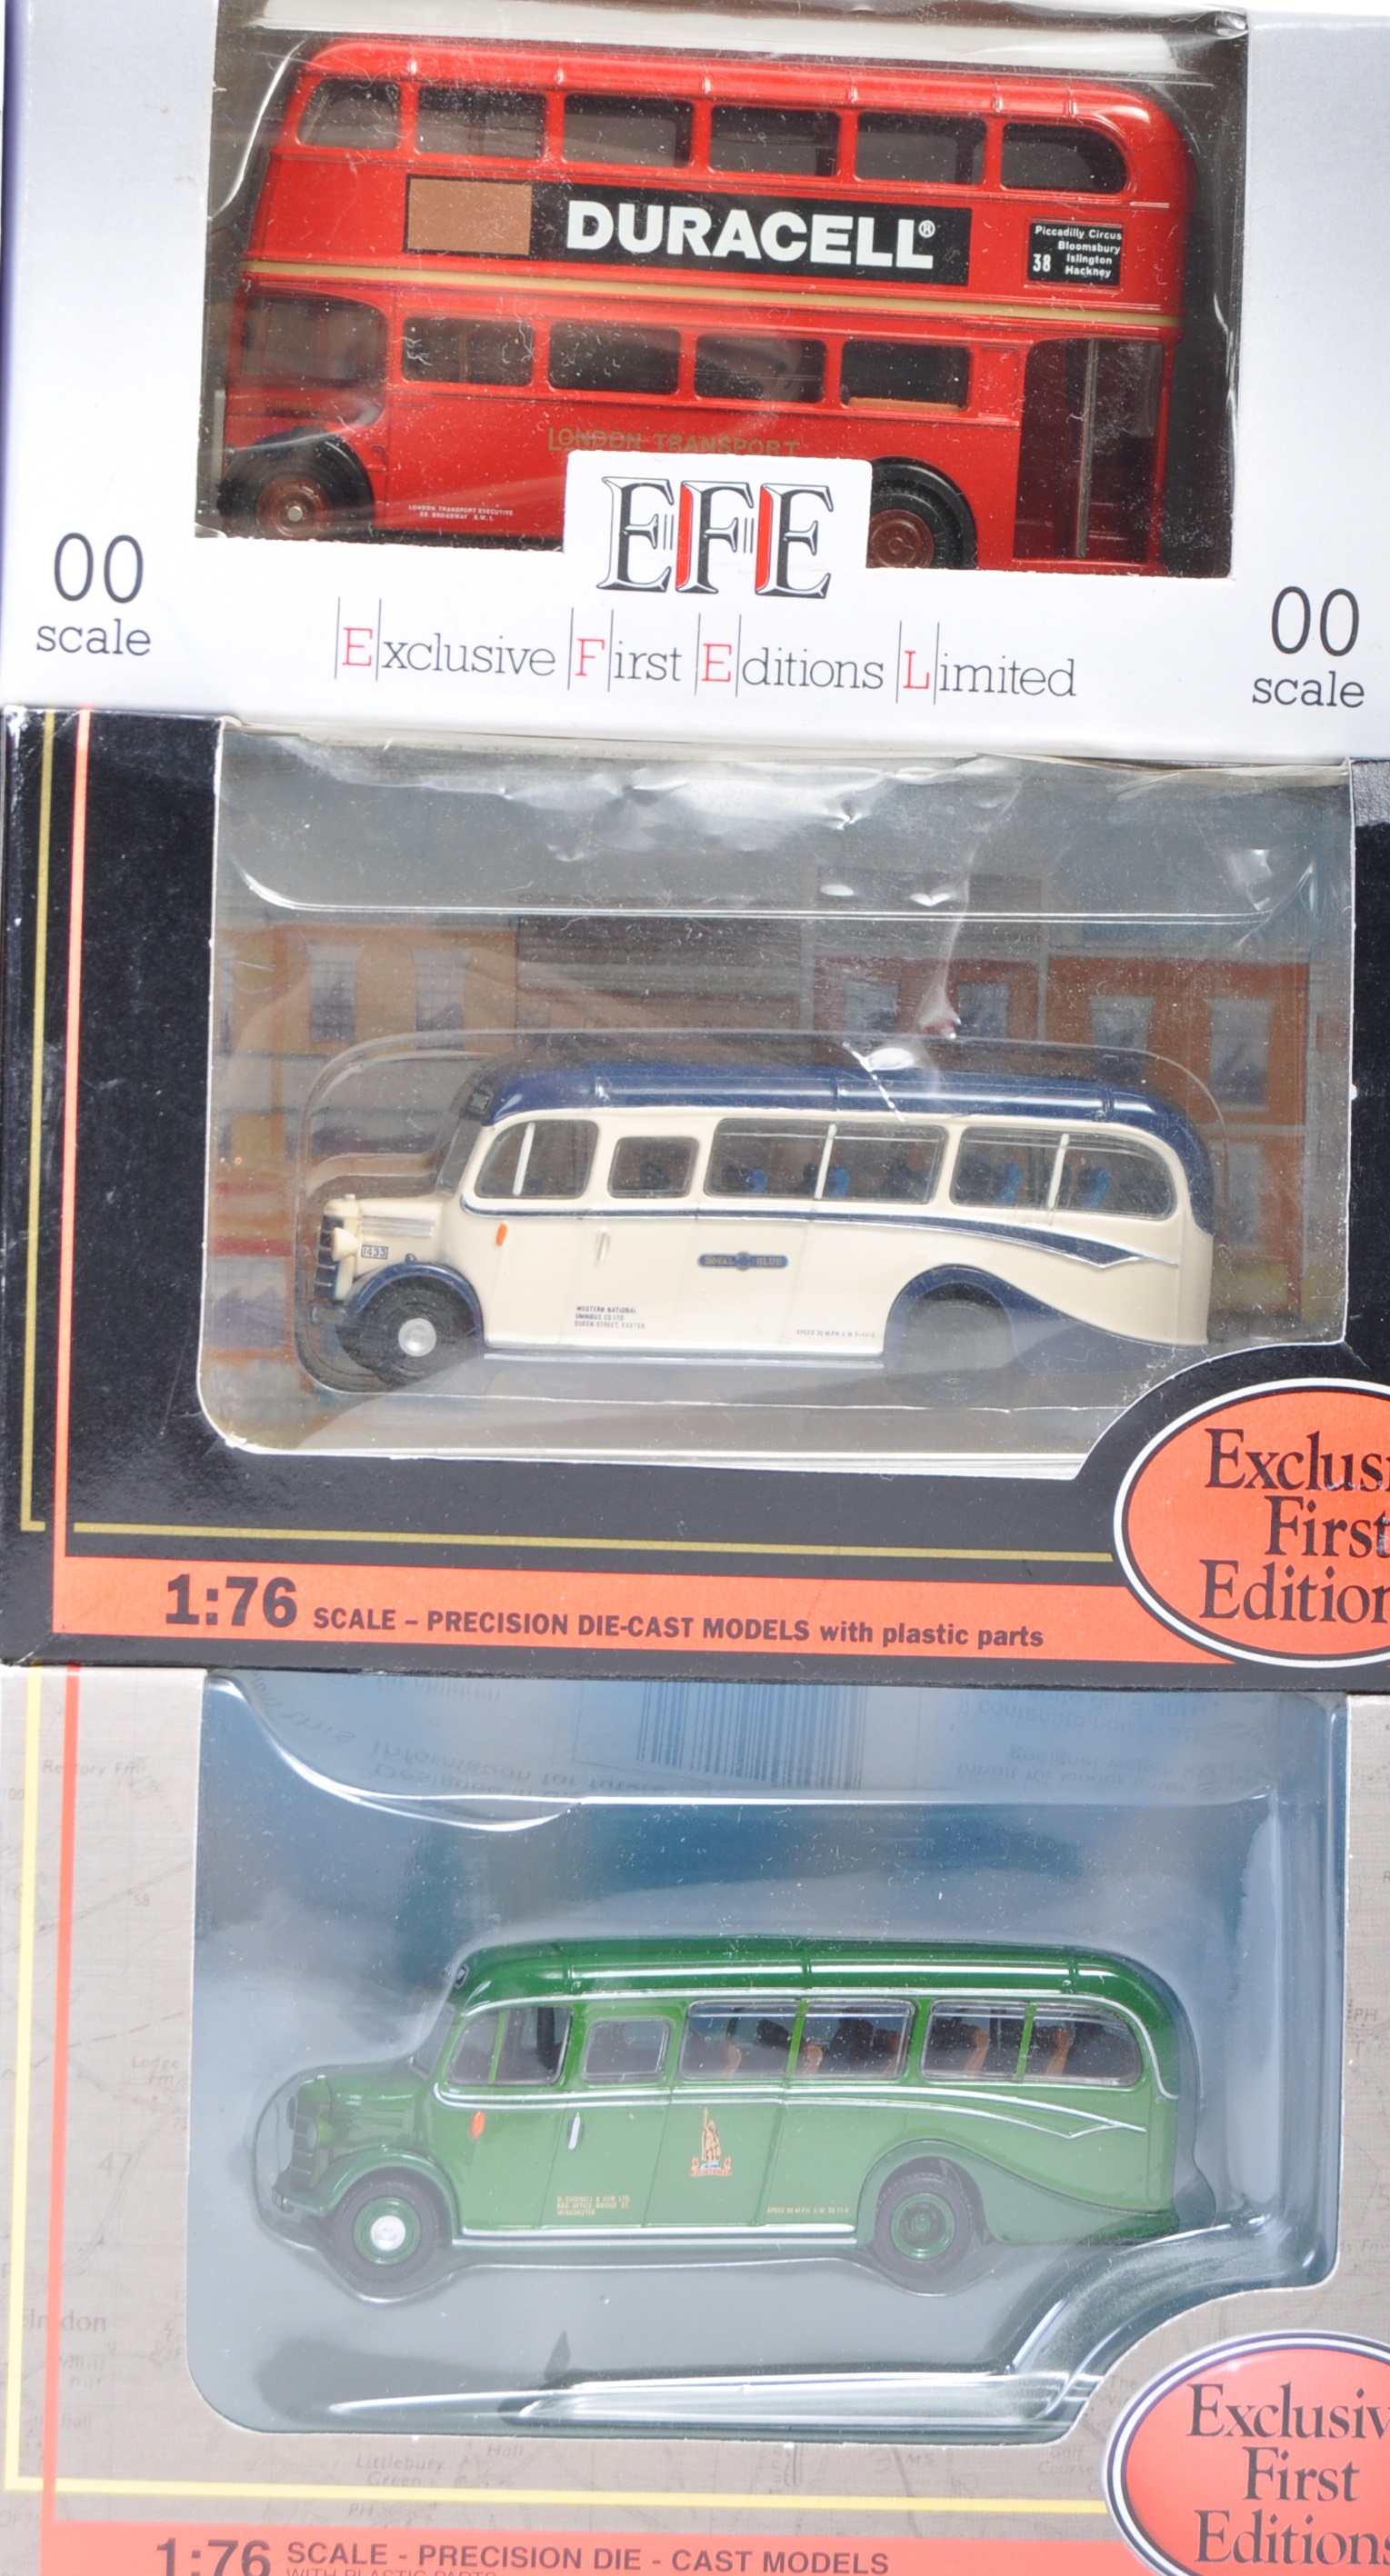 COLLECTION OF EFE 1/76 SCALE DIECAST MODEL BUSES - Image 2 of 5